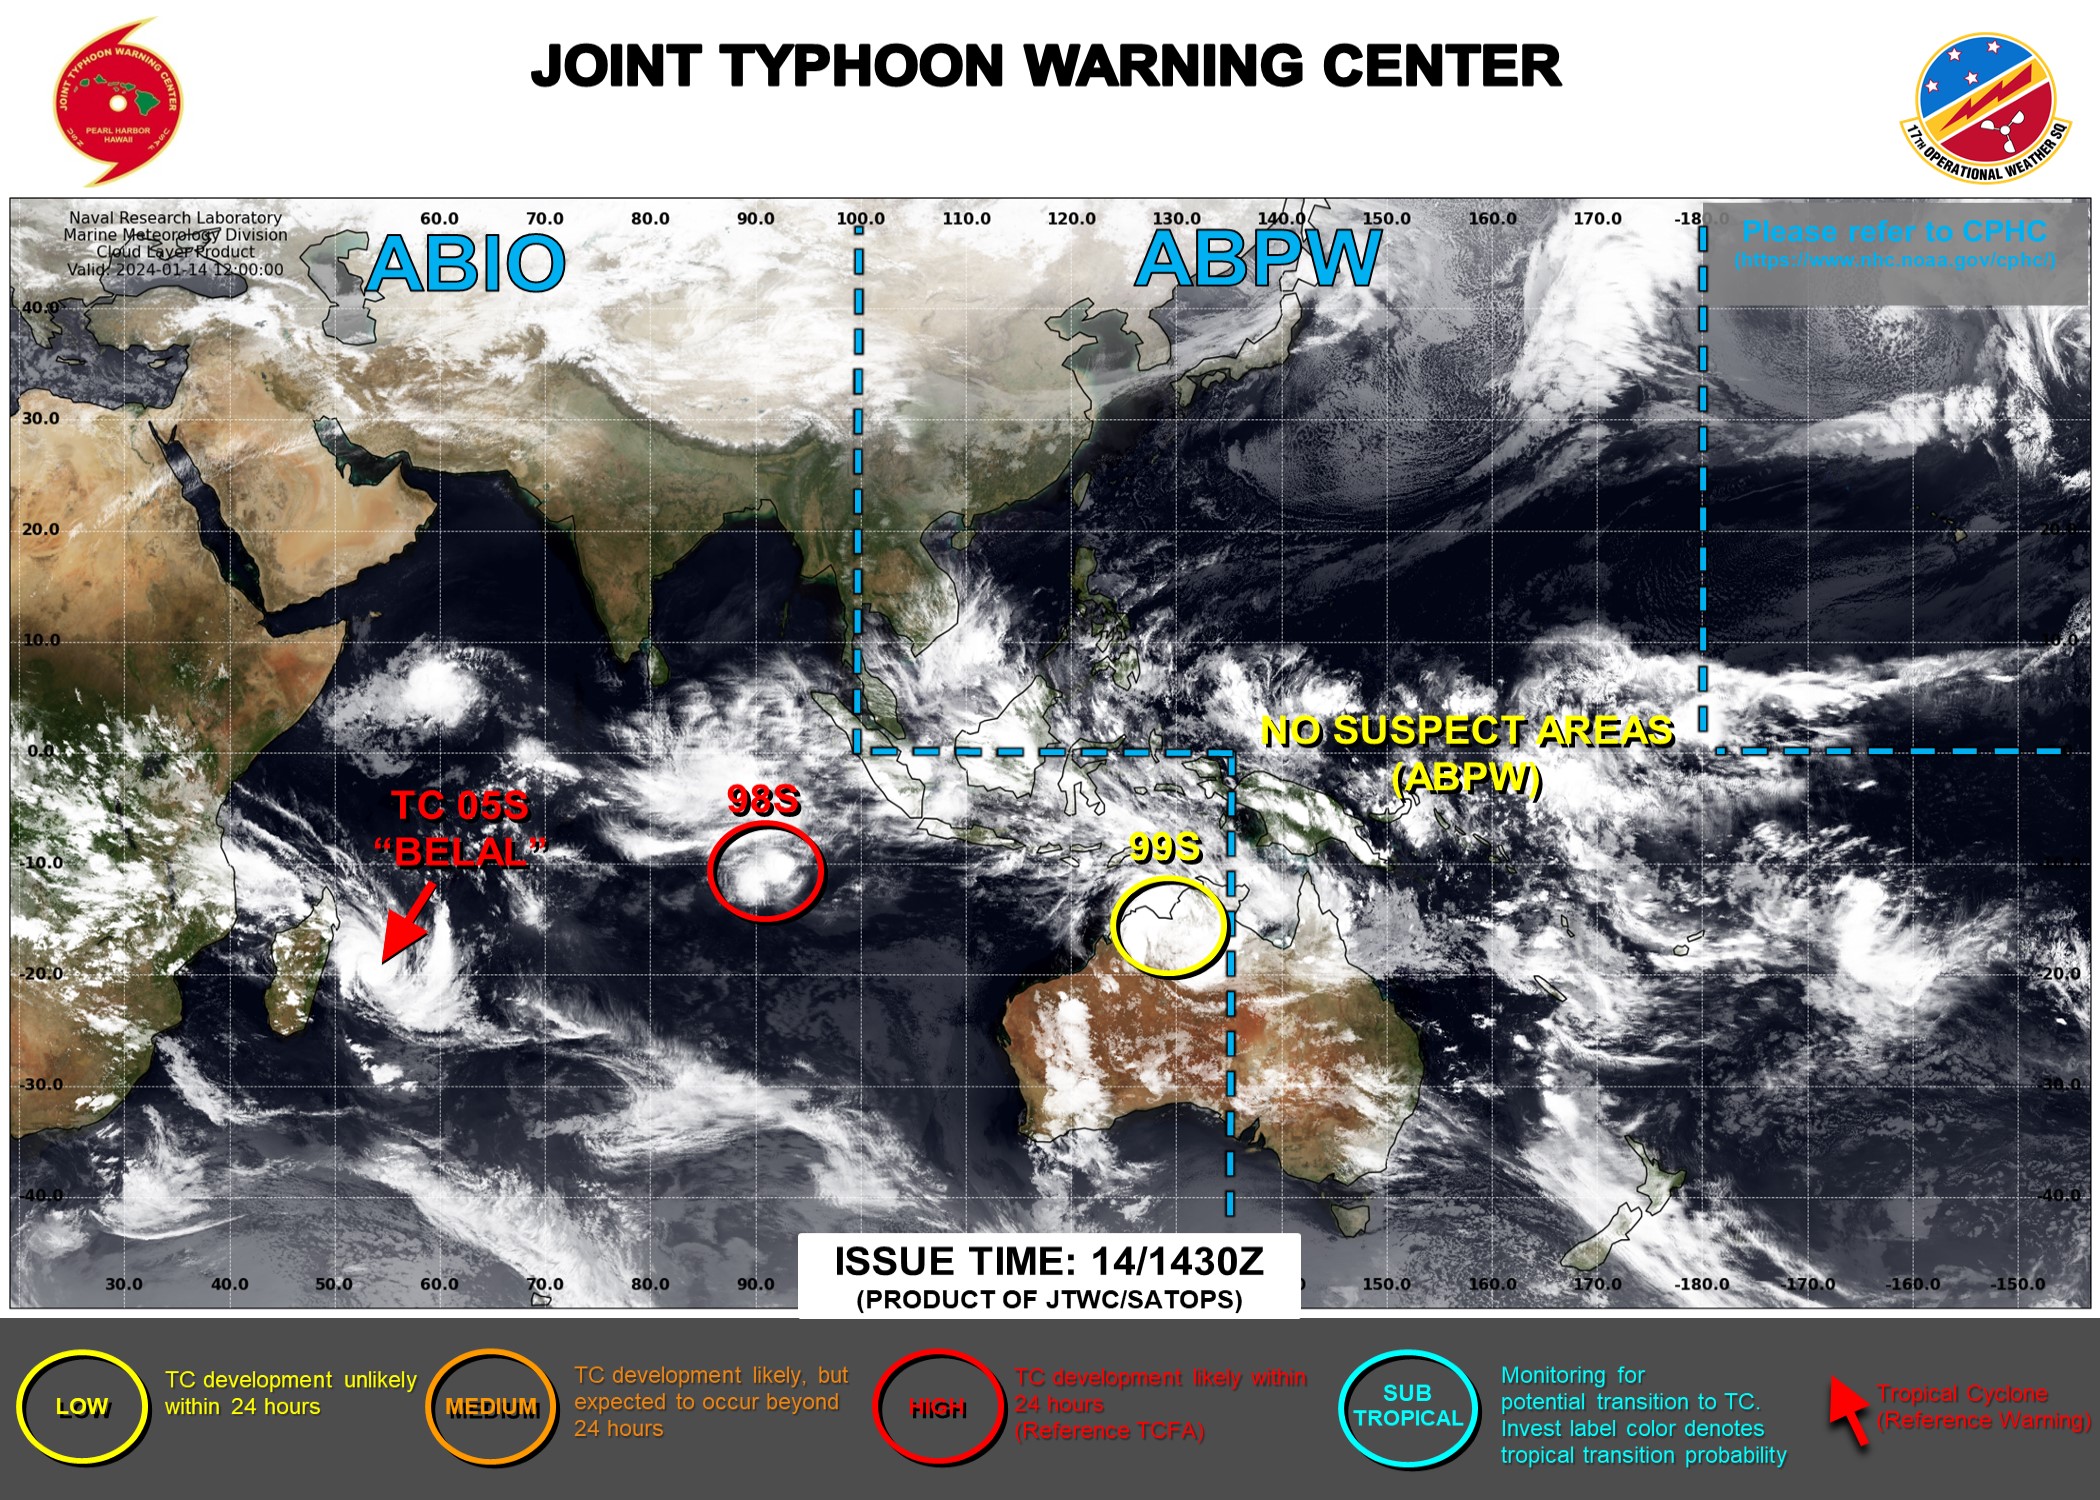 JTWC IS ISSUING 12HOURLY WARNINGS AND 3HOURLY SATELLITE BULLETINS ON TC 05S(BELAL) AND 3HOURLY SATELLITE BULLETINS ON INVEST 98S.